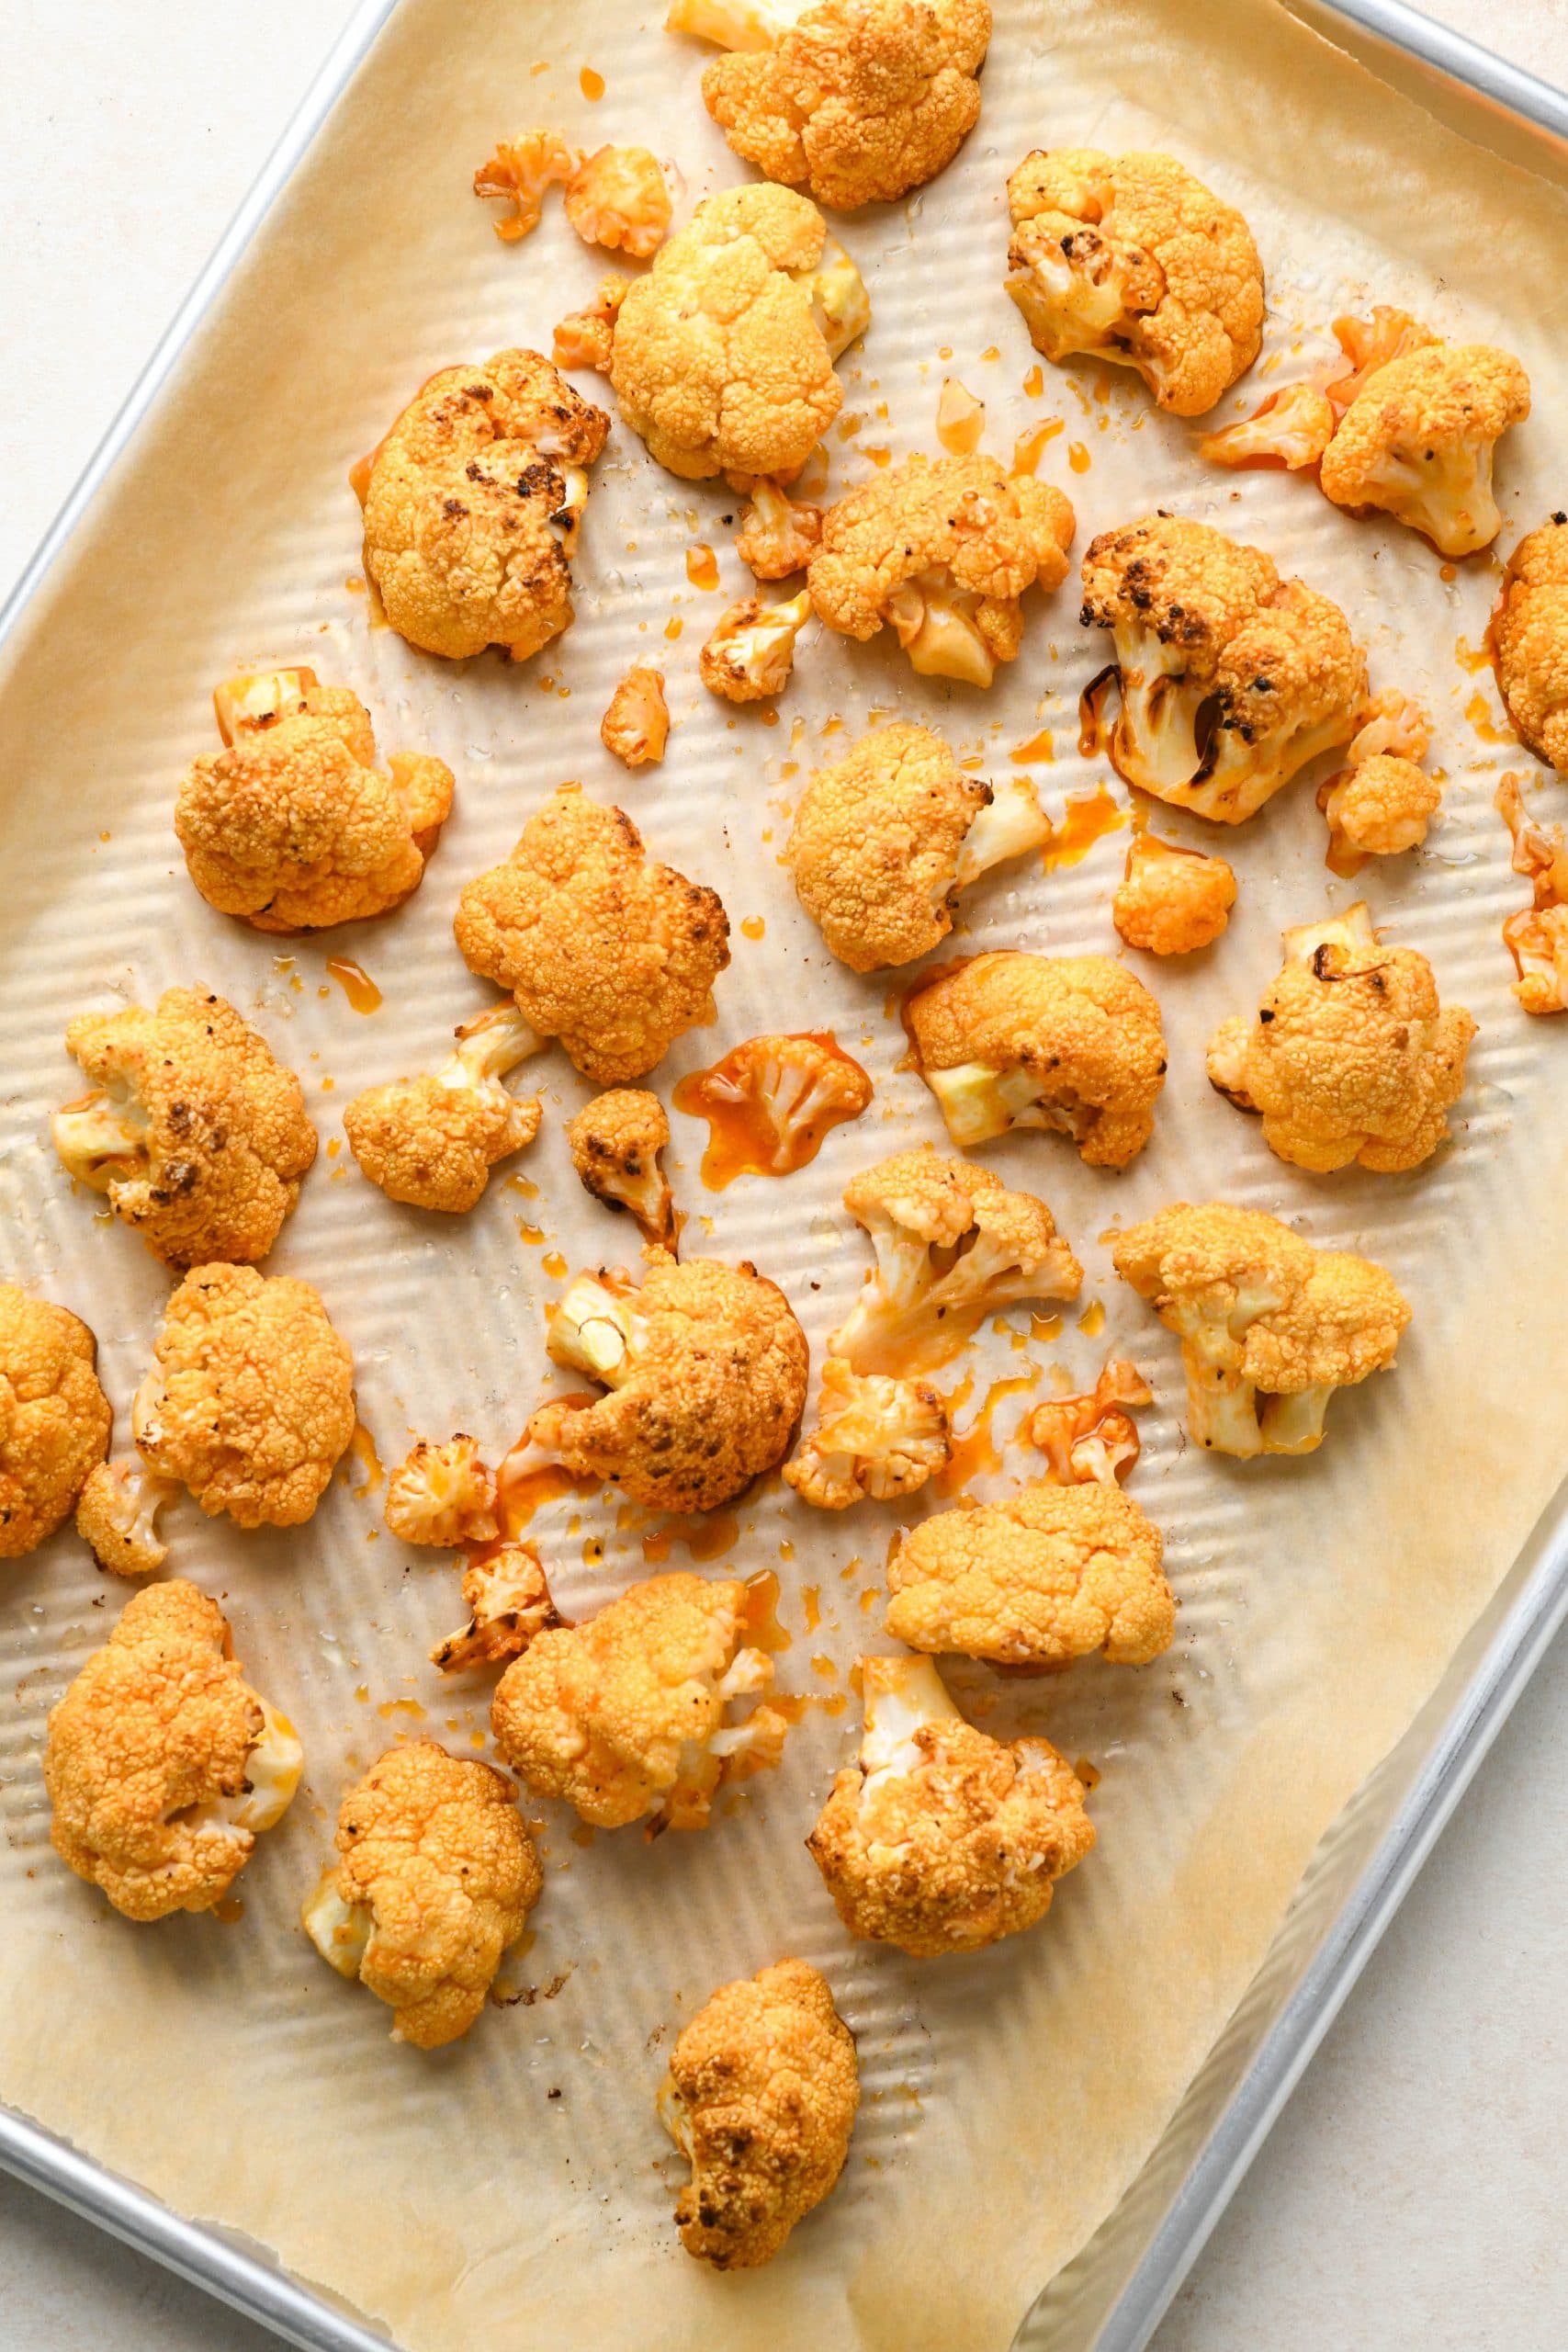 How to make buffalo cauliflower: Roasted cauliflower florets tossed with buffalo sauce and spread out on sheet pan.